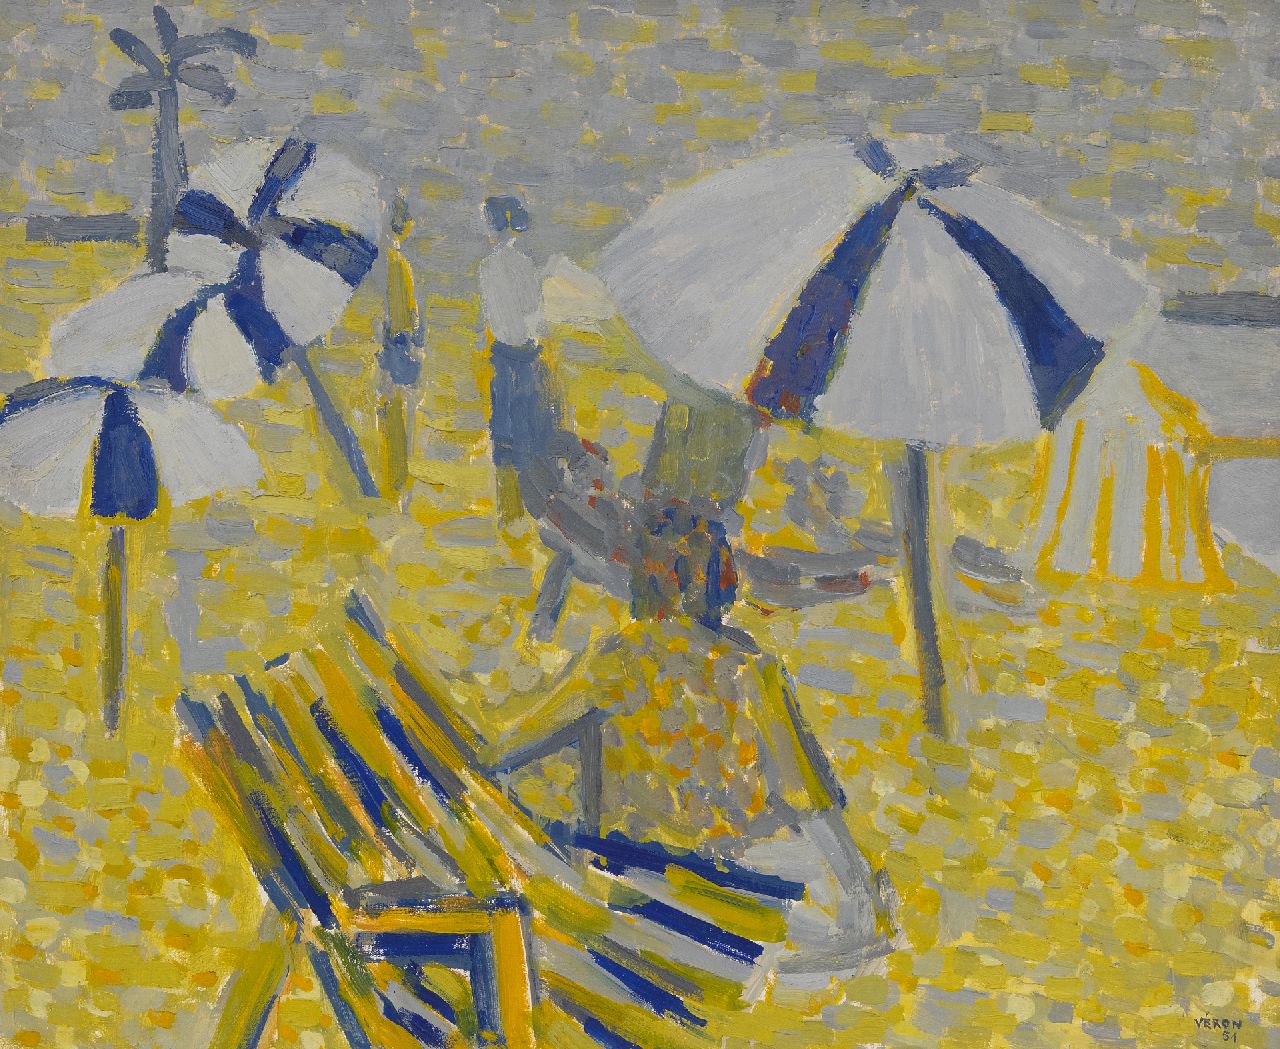 Véron V.  | Véronique Véron | Paintings offered for sale | Beach umbrellas, oil on canvas 54.0 x 65.0 cm, signed l.r. and dated '51